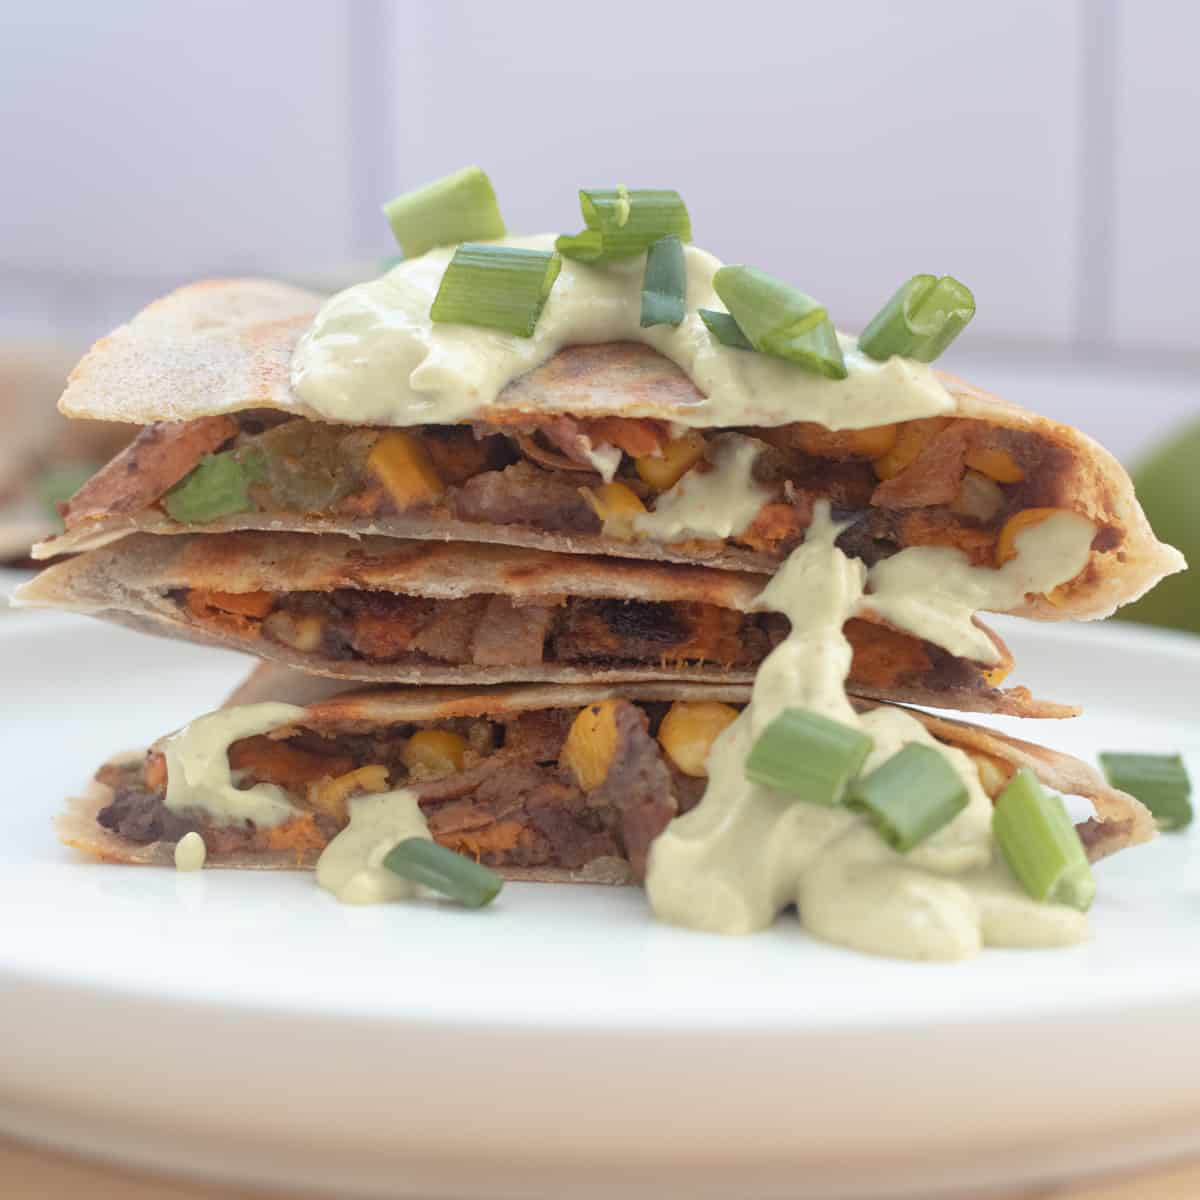 A stack of sweet potato quesadillas topped with green avocado lime dip.